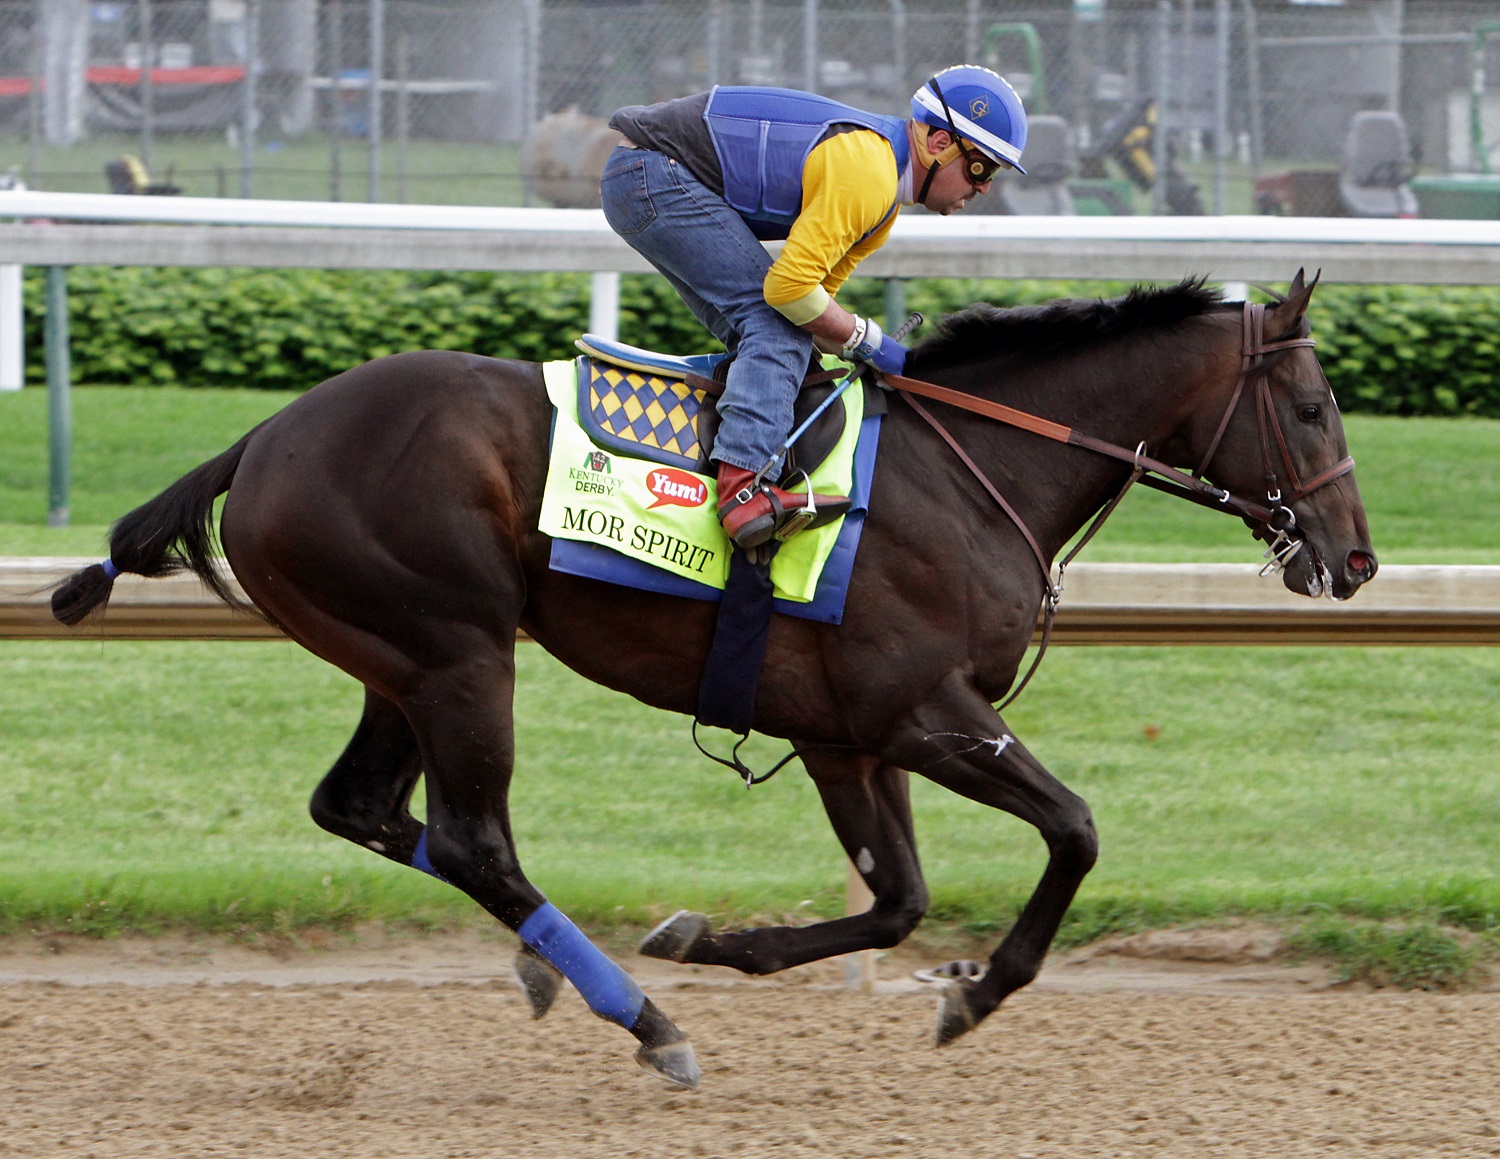 Kentucky Derby entrant Mor Spirit, ridden by George Alvarez, gallops at Churchill Downs in Louisville, Ky., Thursday, May 5,  2016. The 142nd Kentucky Derby is Saturday, May 7. (AP Photo/Garry Jones)